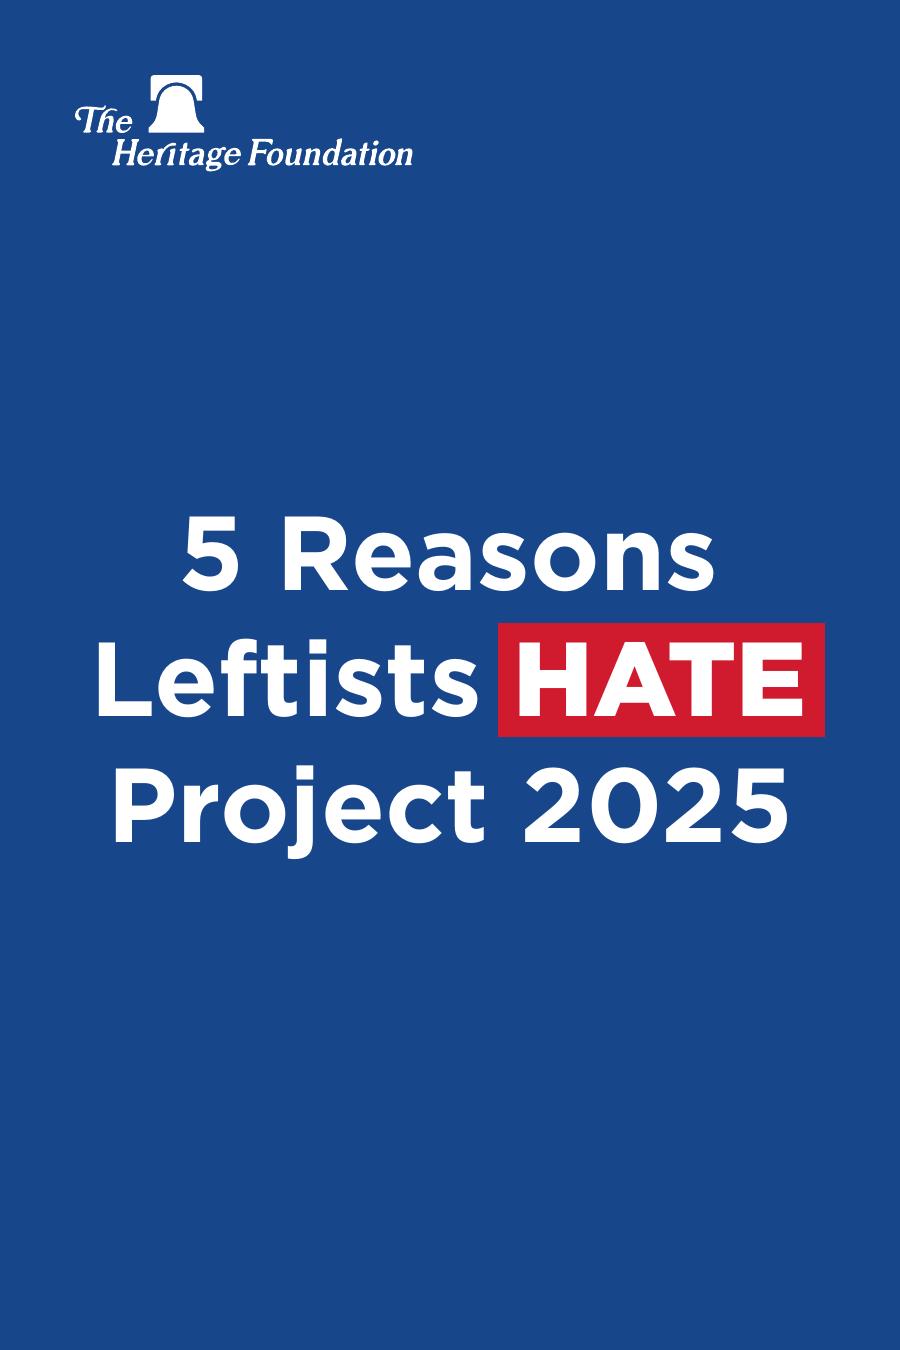 5 Reasons Leftists Hate Project 2025